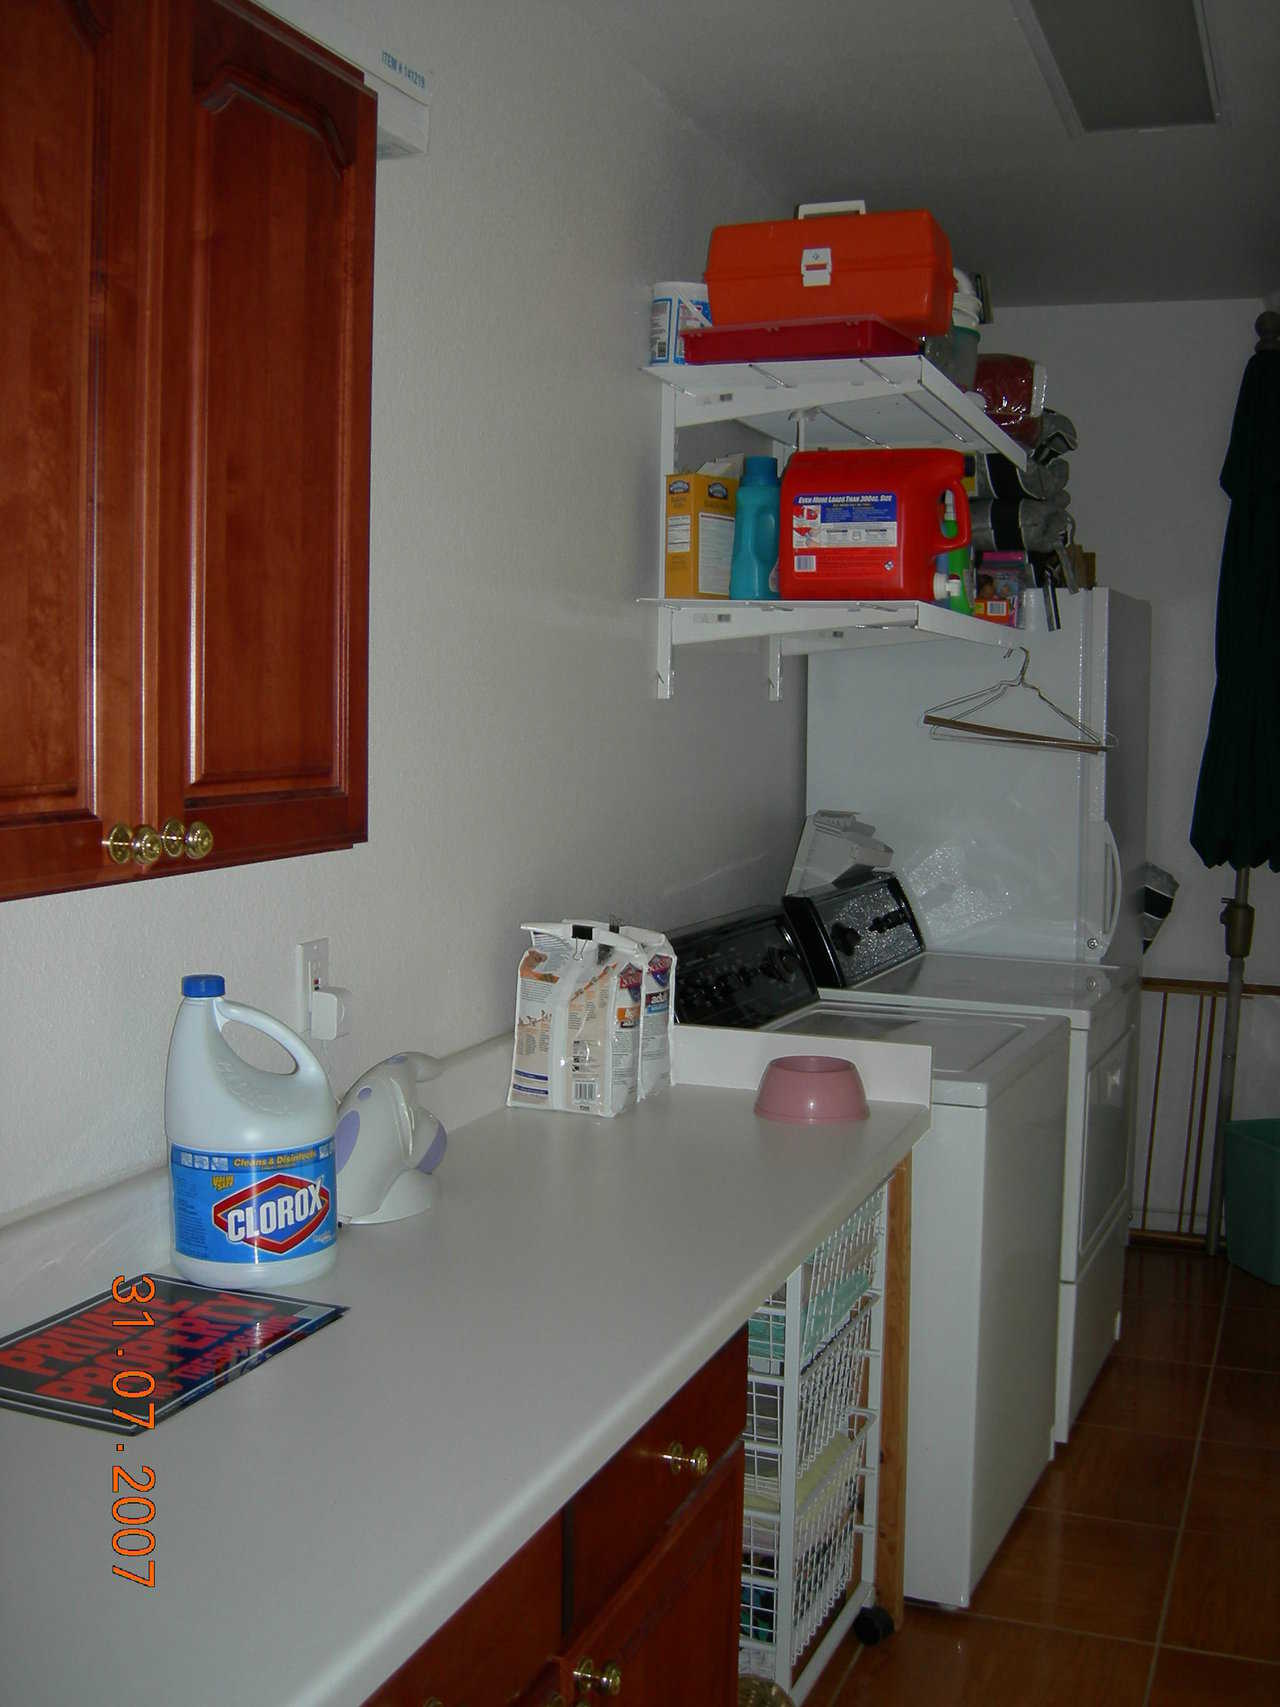 Utility room — Cabinets and hanging shelves provide needed storage.